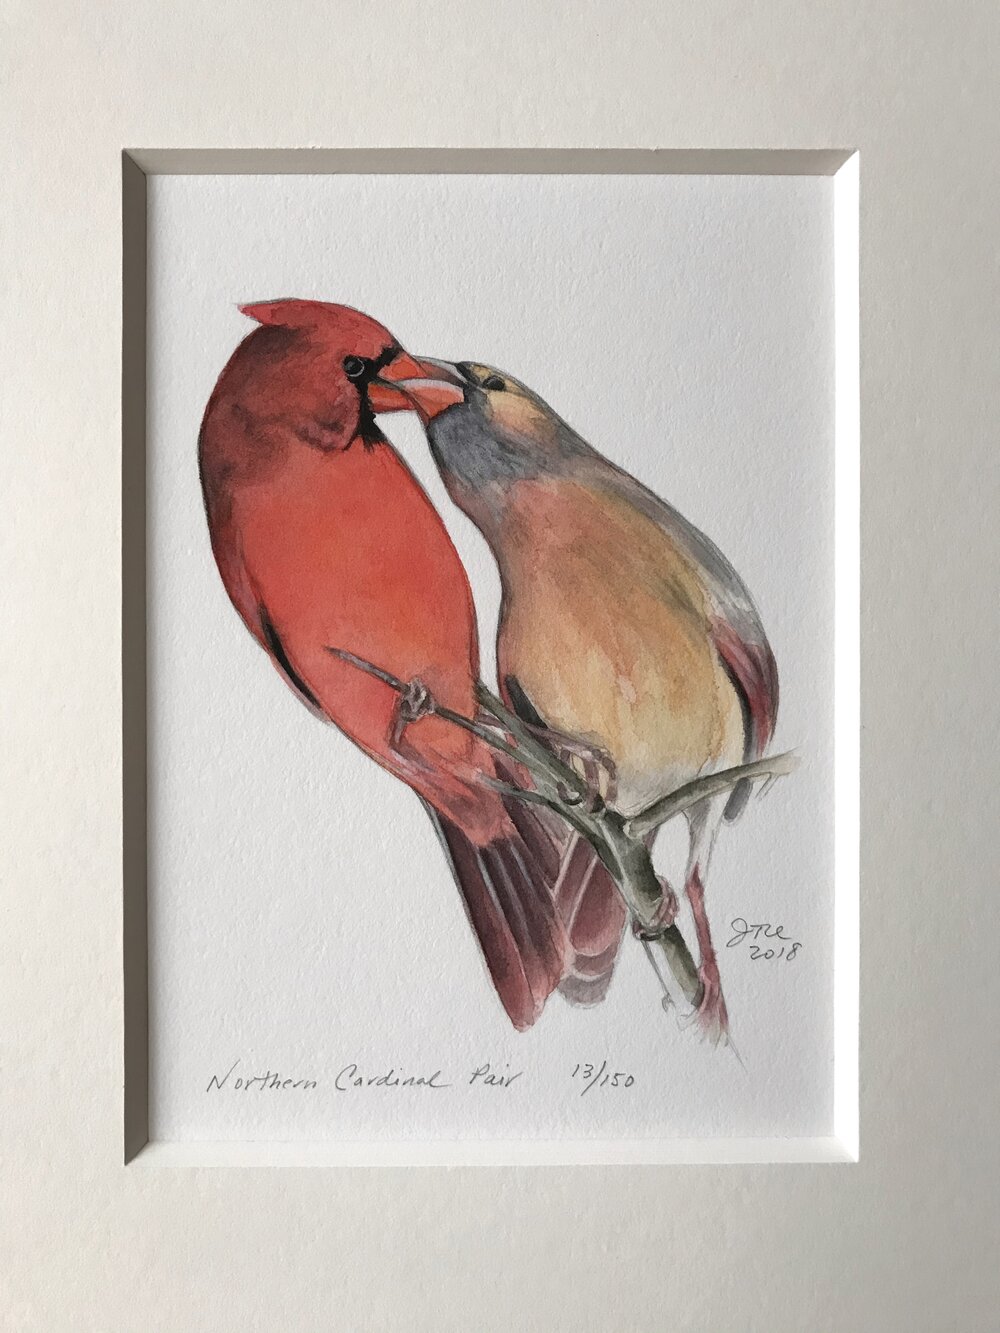 4x5.75/'/' Set of 2 Without Envelopes Watercolor Art Prints Northern Cardinal And Robin Postcards Print Original Art Prints Print Cards